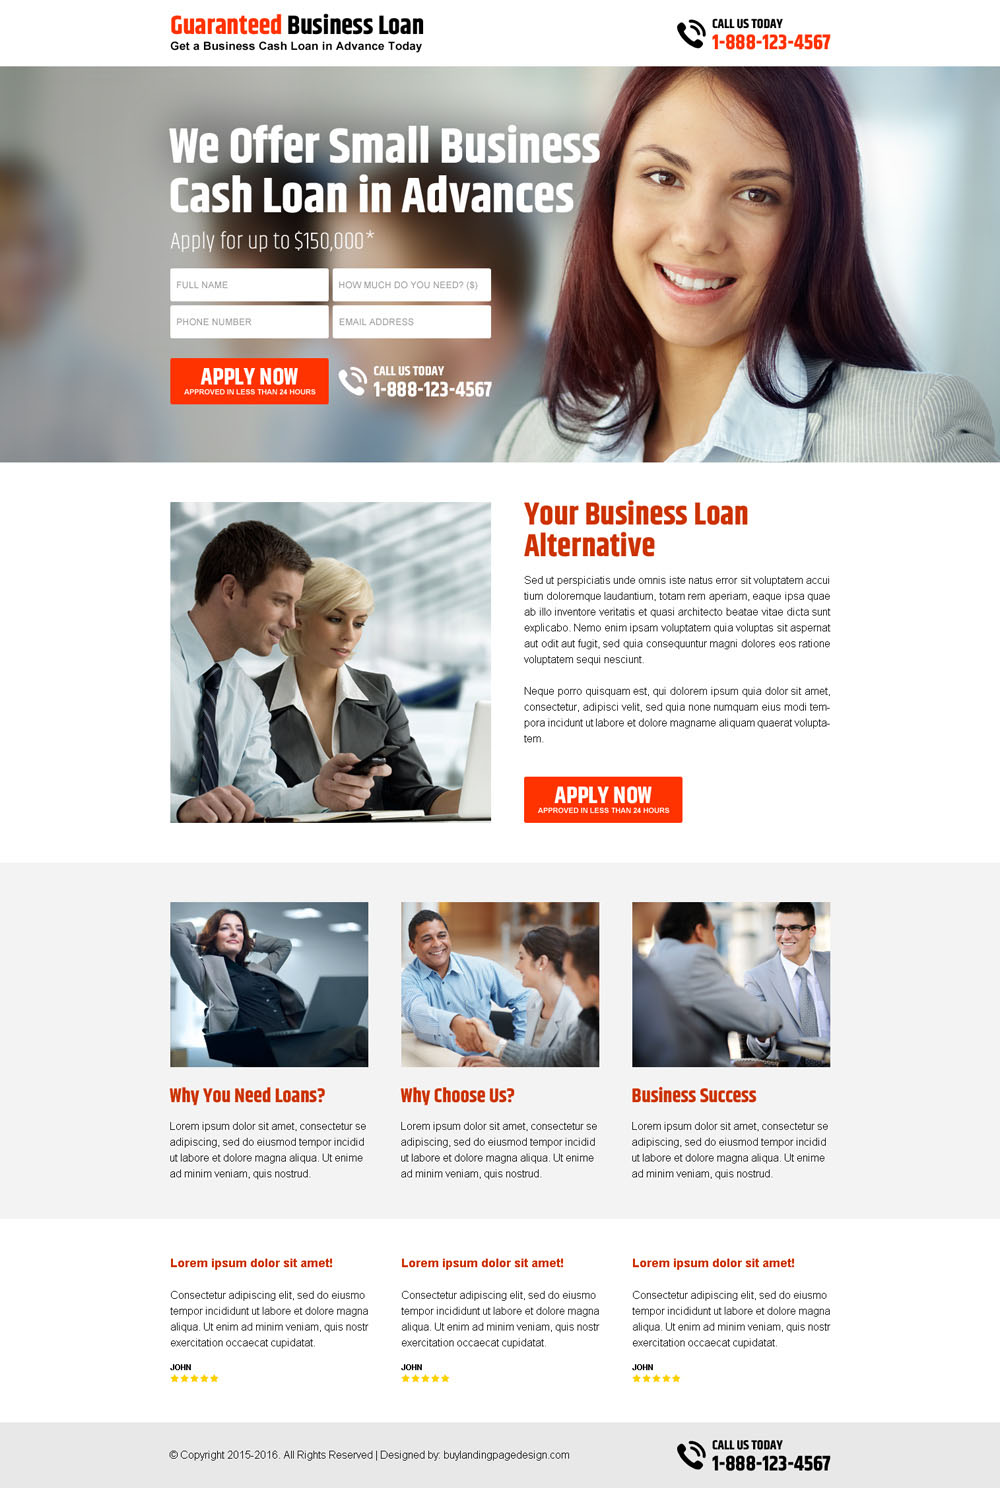 small-business-cash-loan-in-advance-lead-capture-landing-page-design-018